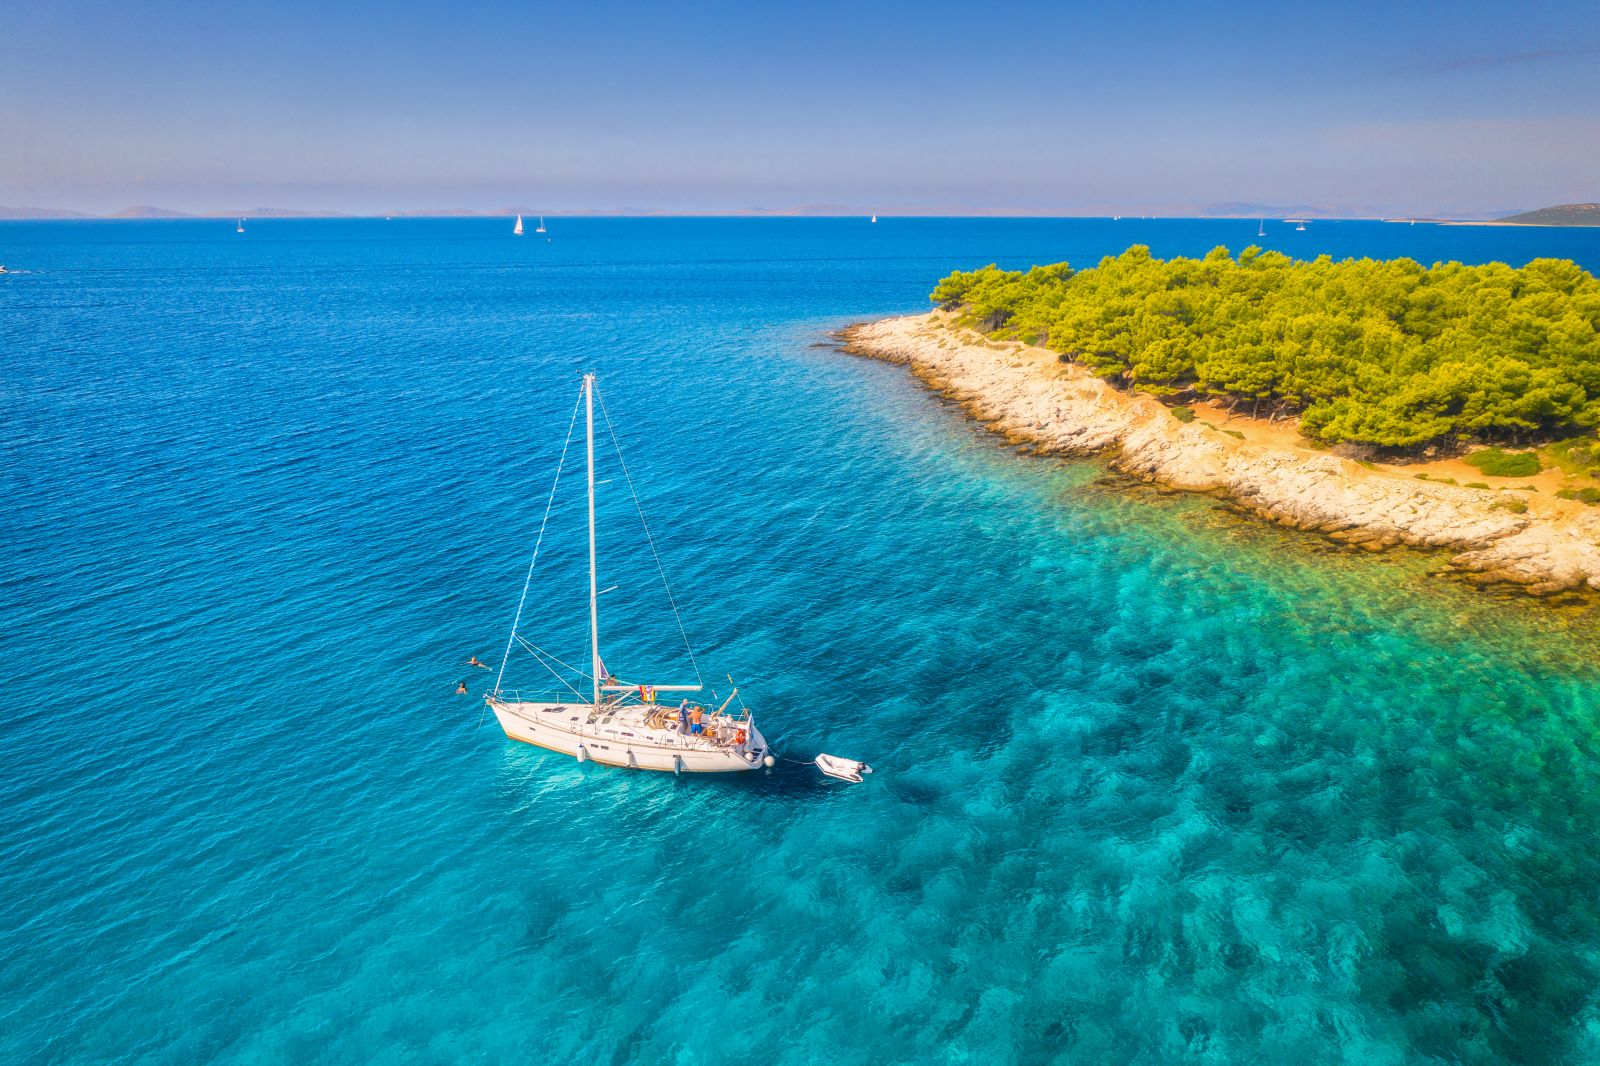 Aerial view of a gulet sailing in turquoise waters in Croatia